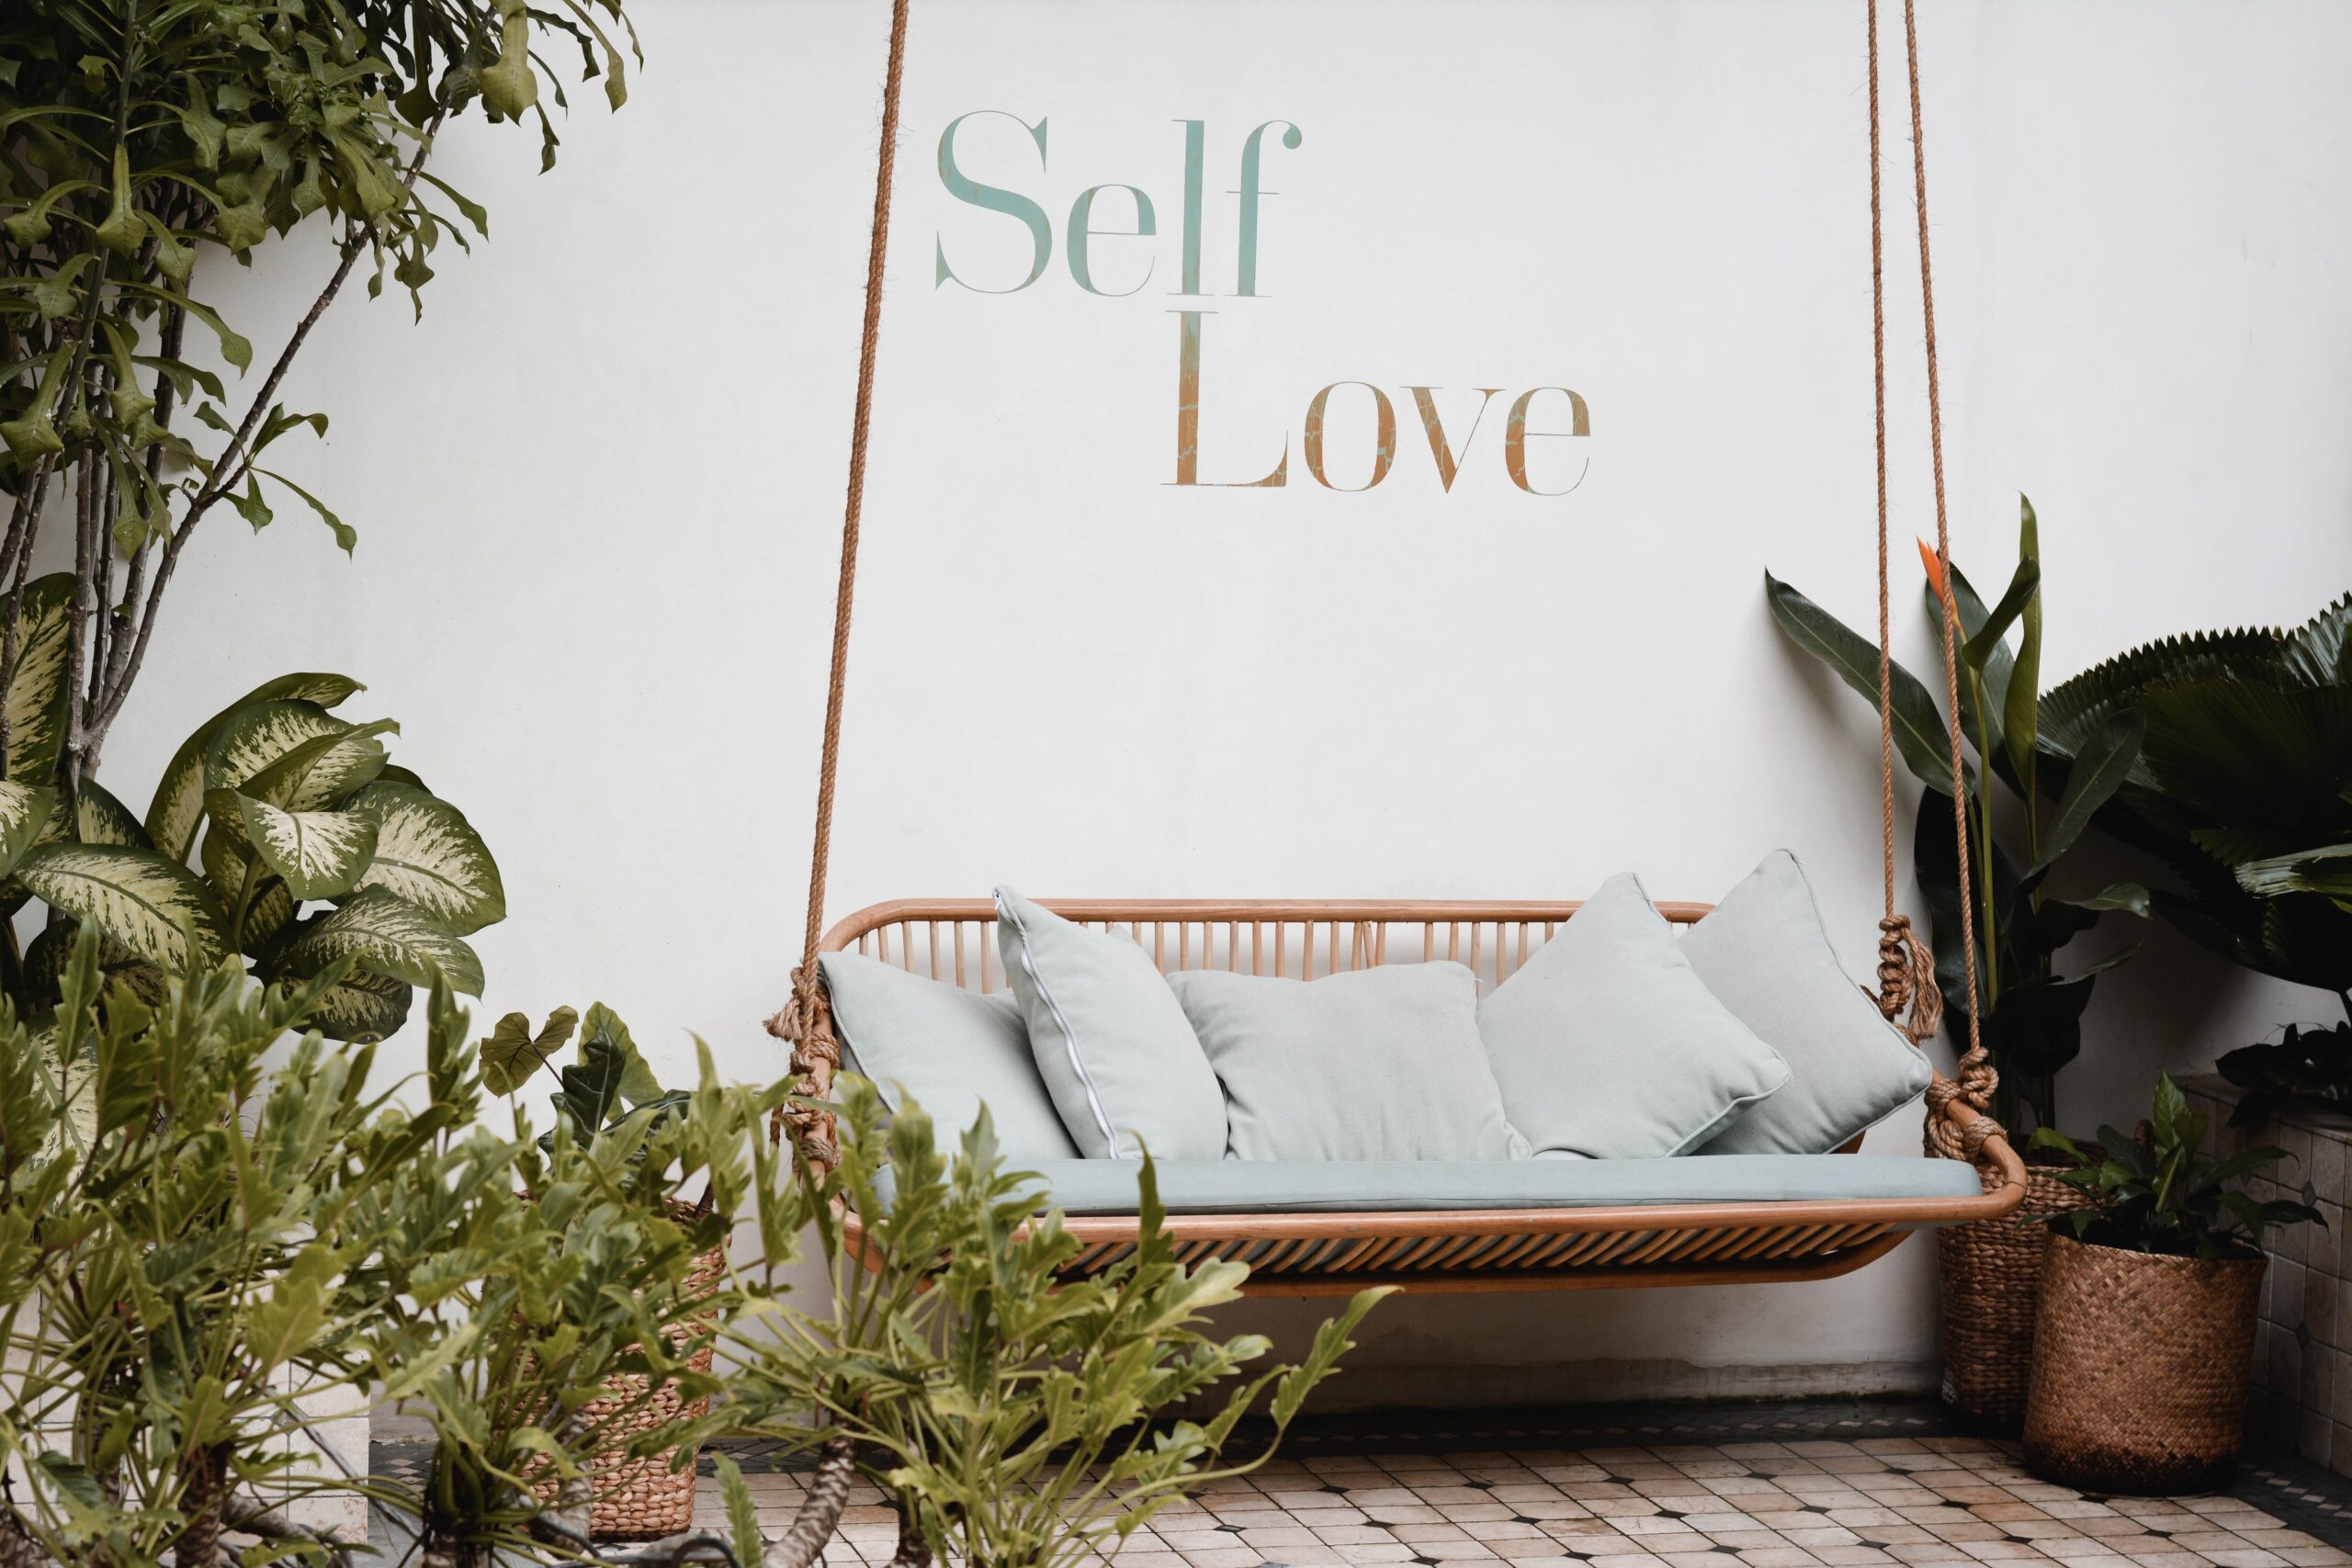 Make self-love a priority this new year